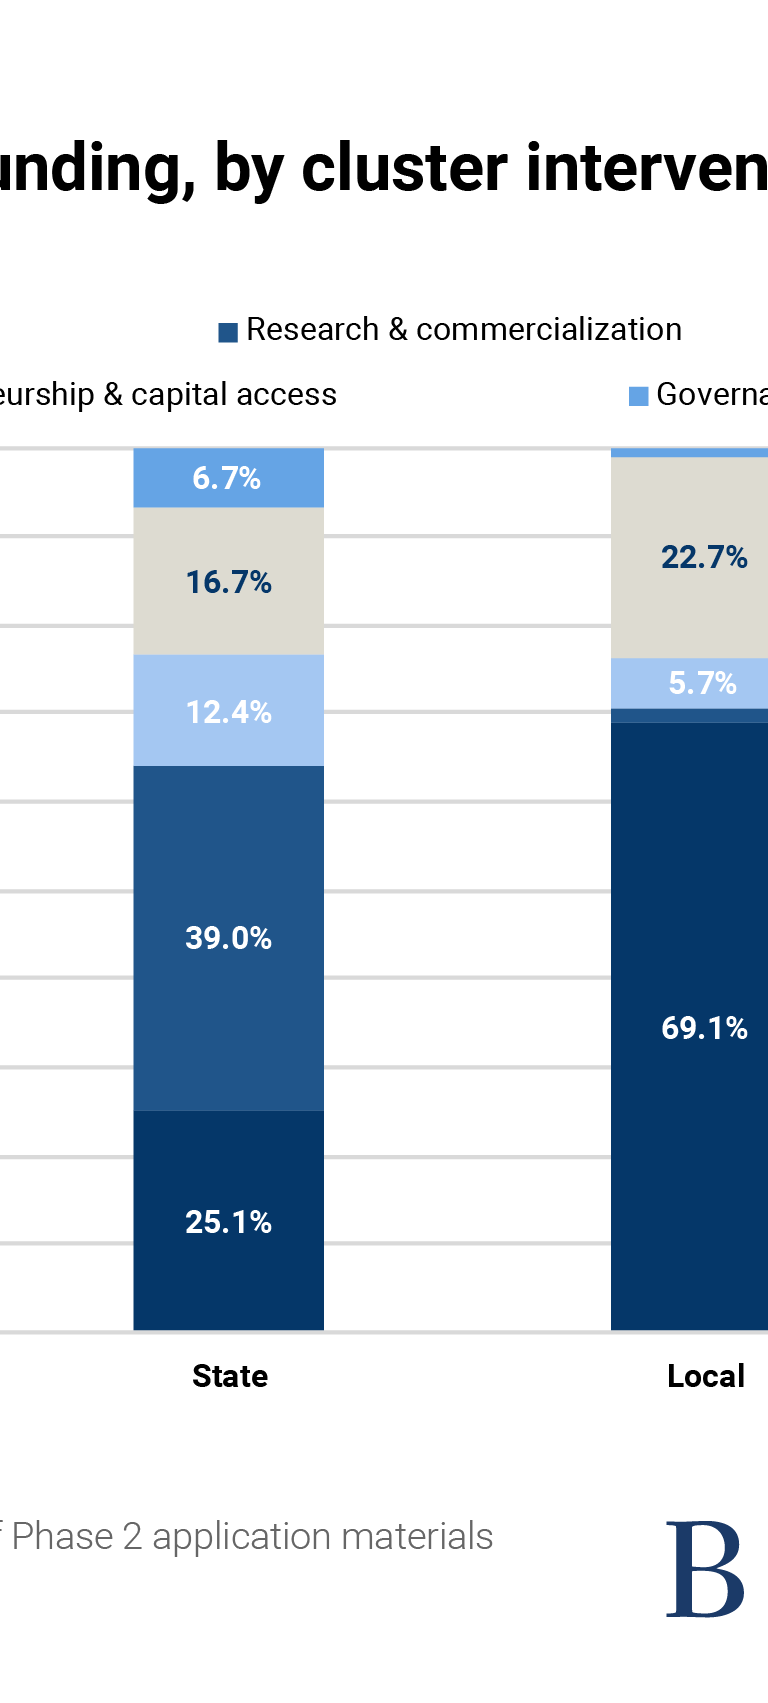 Share of matched funding, by cluster intervention